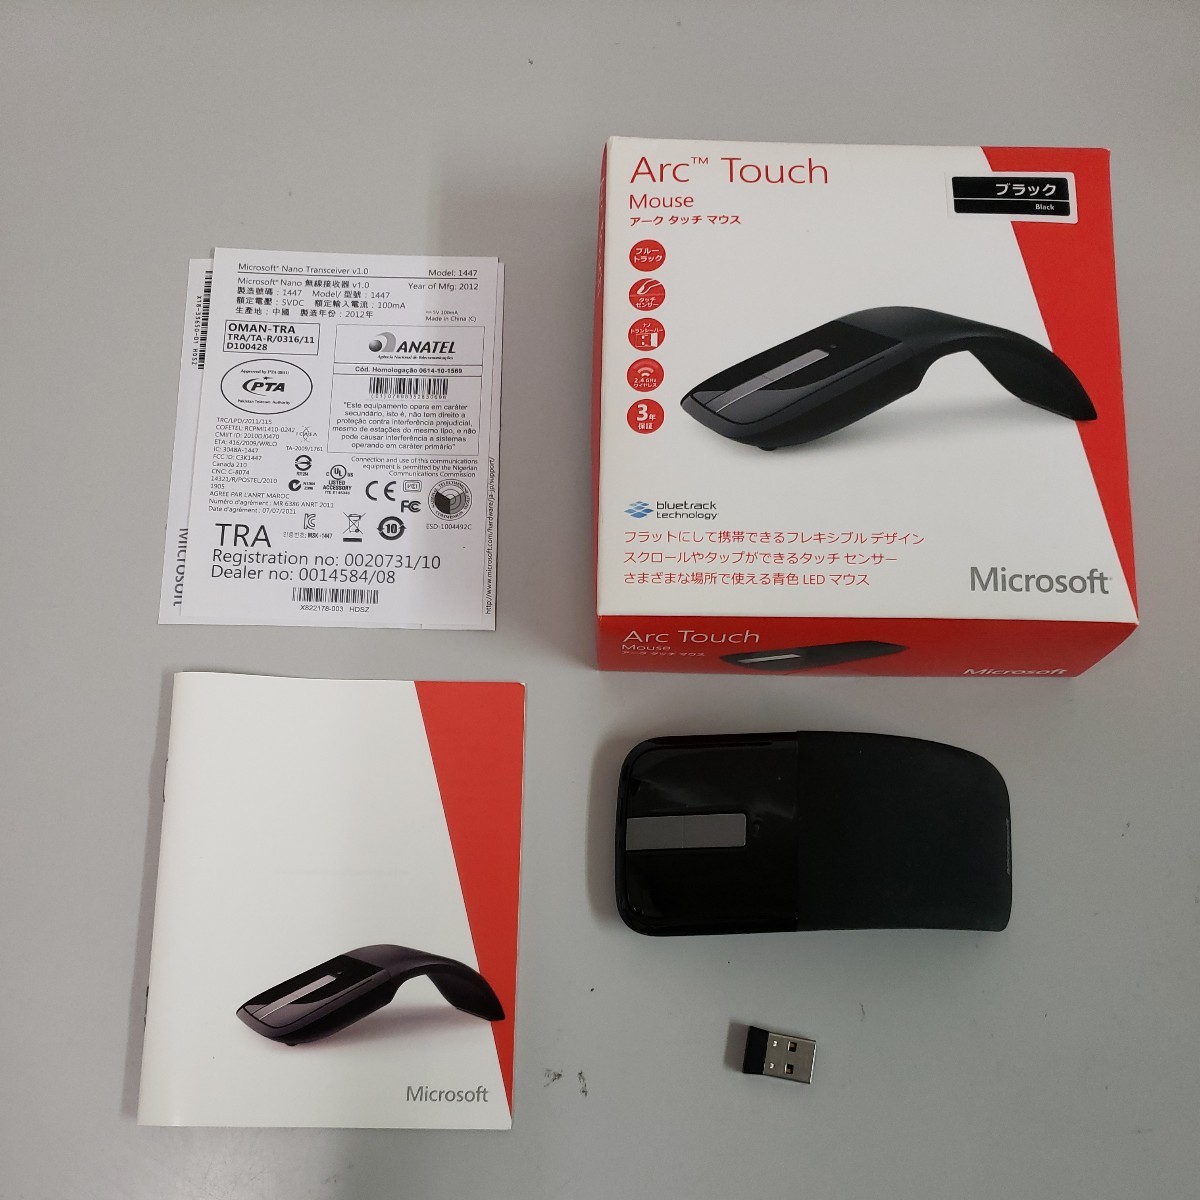 512y0416* Microsoft blue truck wireless mouse Arc Touch Mouse black RVF-00052